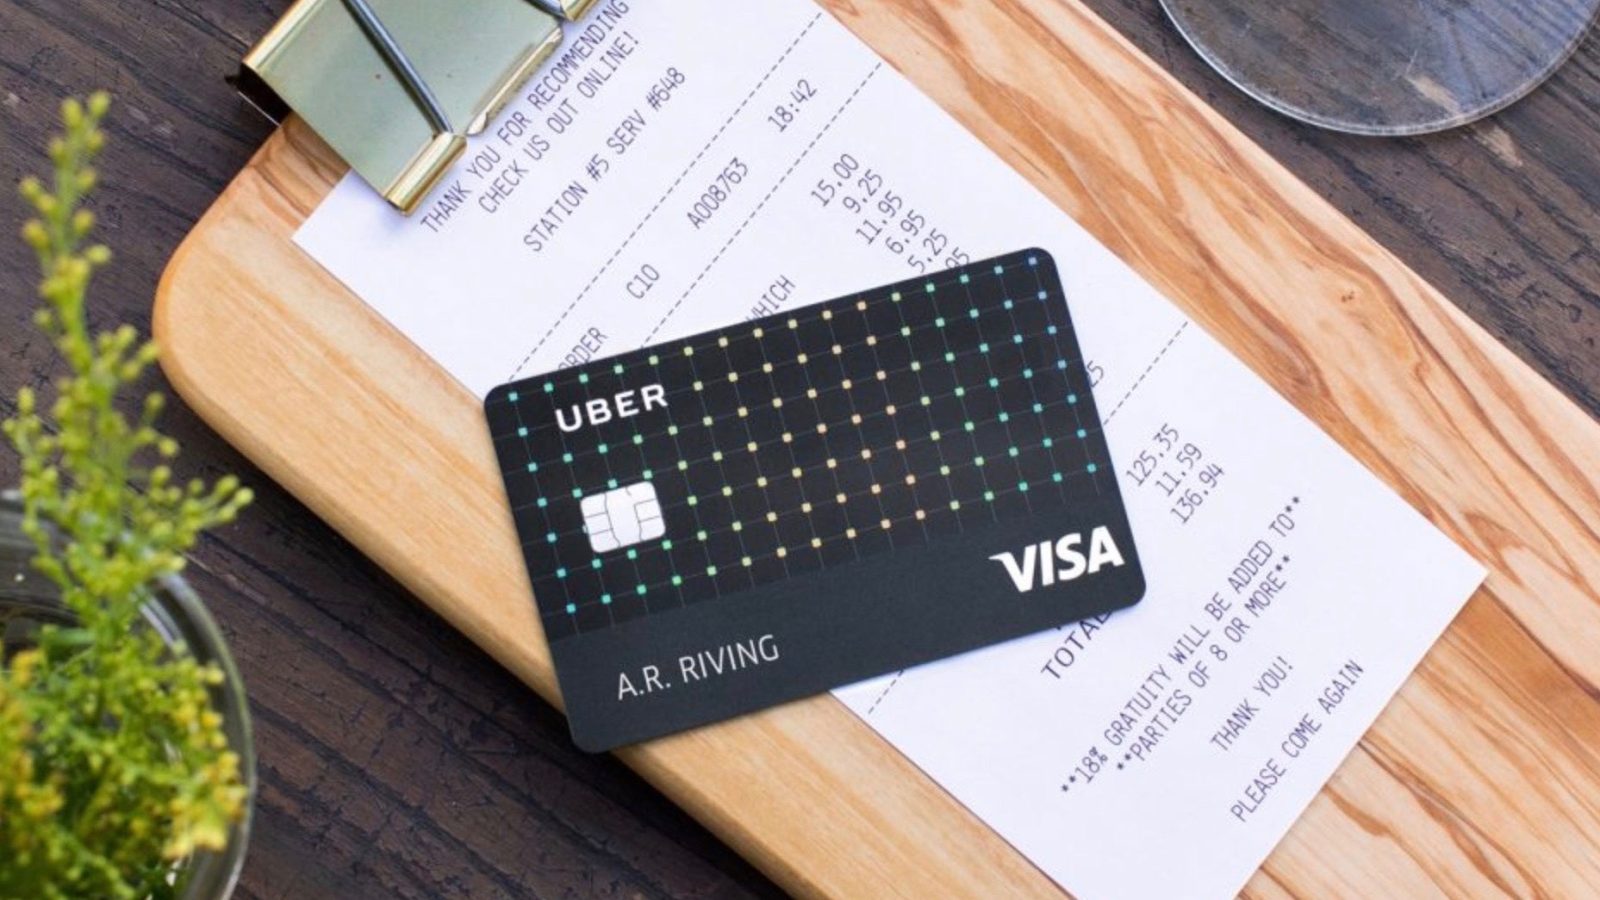 Uber's new credit card rewards you with ride-hailing perks, phone insurance, more - 9to5Mac